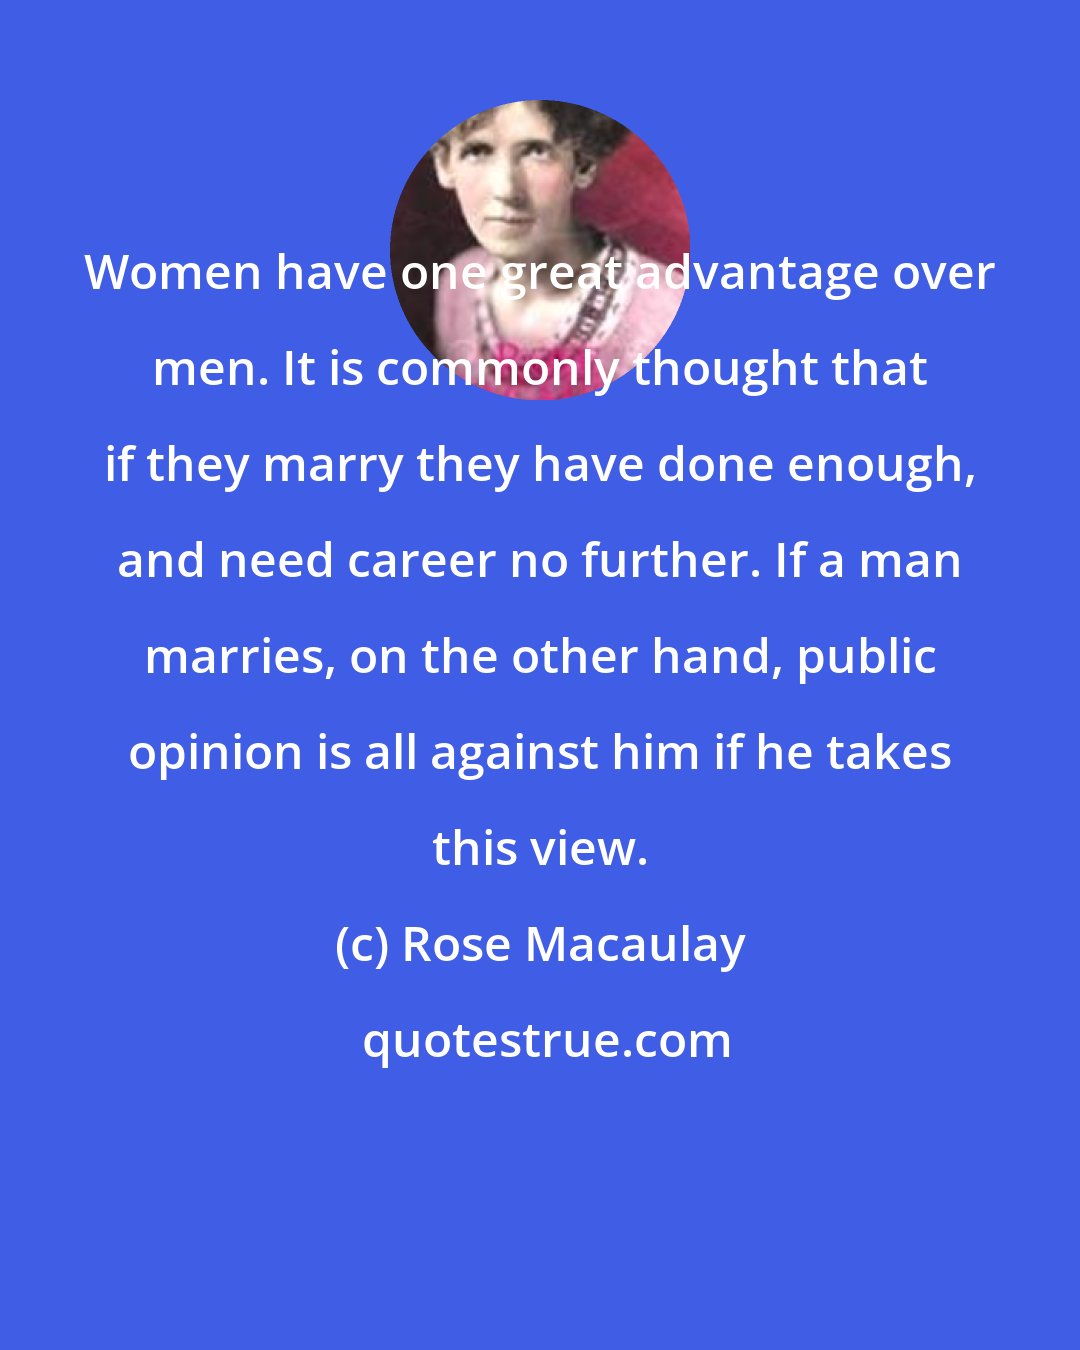 Rose Macaulay: Women have one great advantage over men. It is commonly thought that if they marry they have done enough, and need career no further. If a man marries, on the other hand, public opinion is all against him if he takes this view.